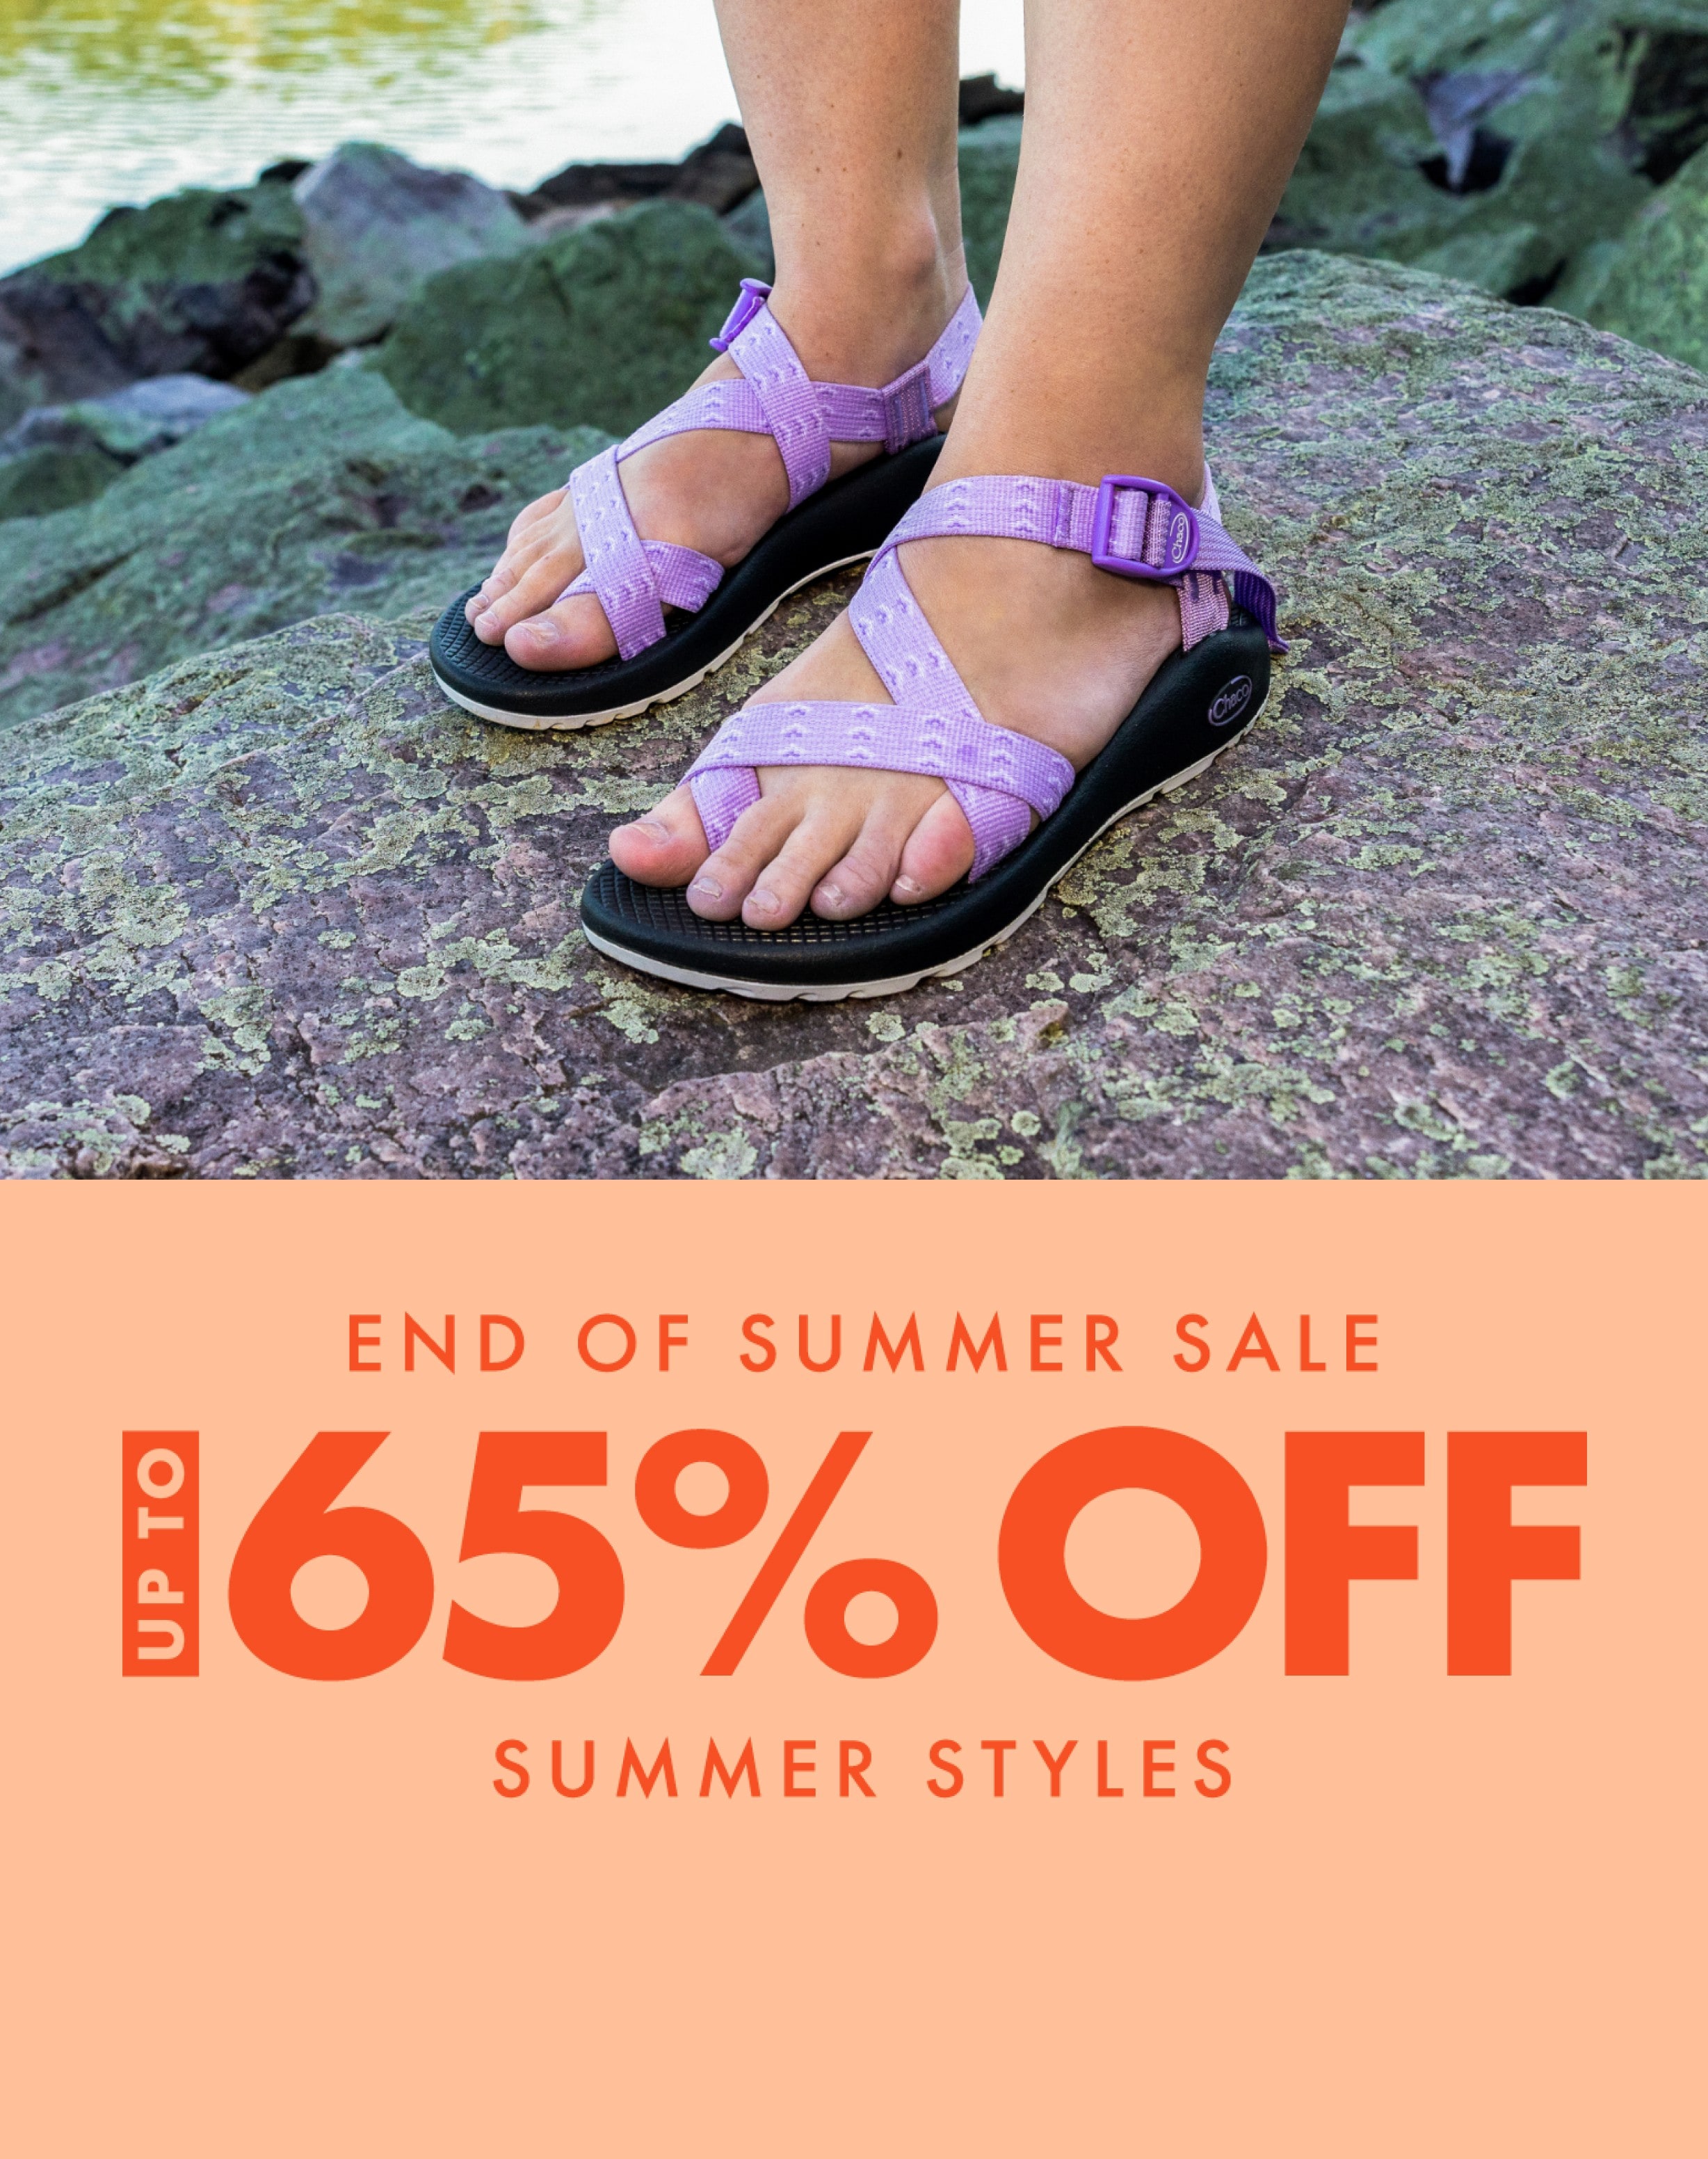 End Of Summer Sale - Up To 65% Off Summer Styles